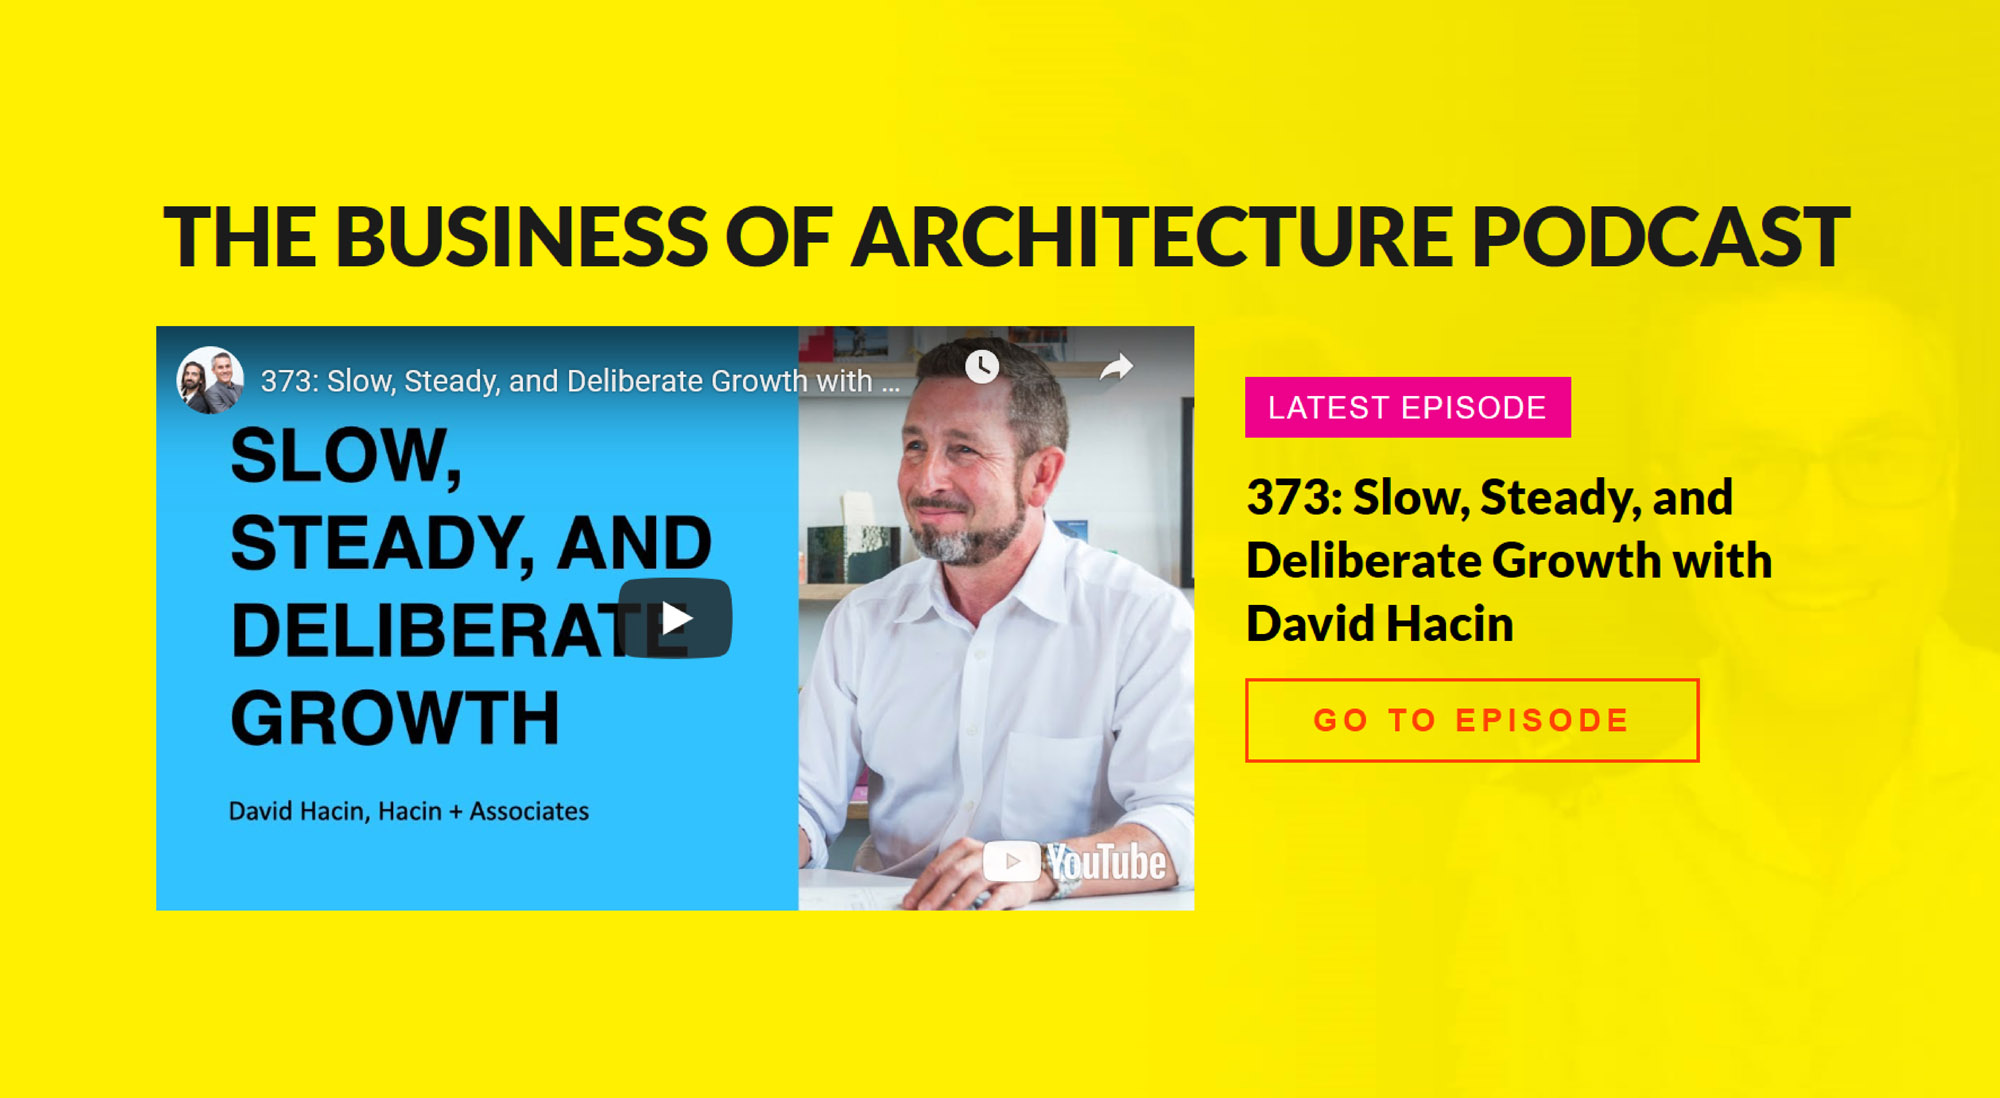 David Hacin on Business of Architecture: “Slow, Steady, and Deliberate Growth”